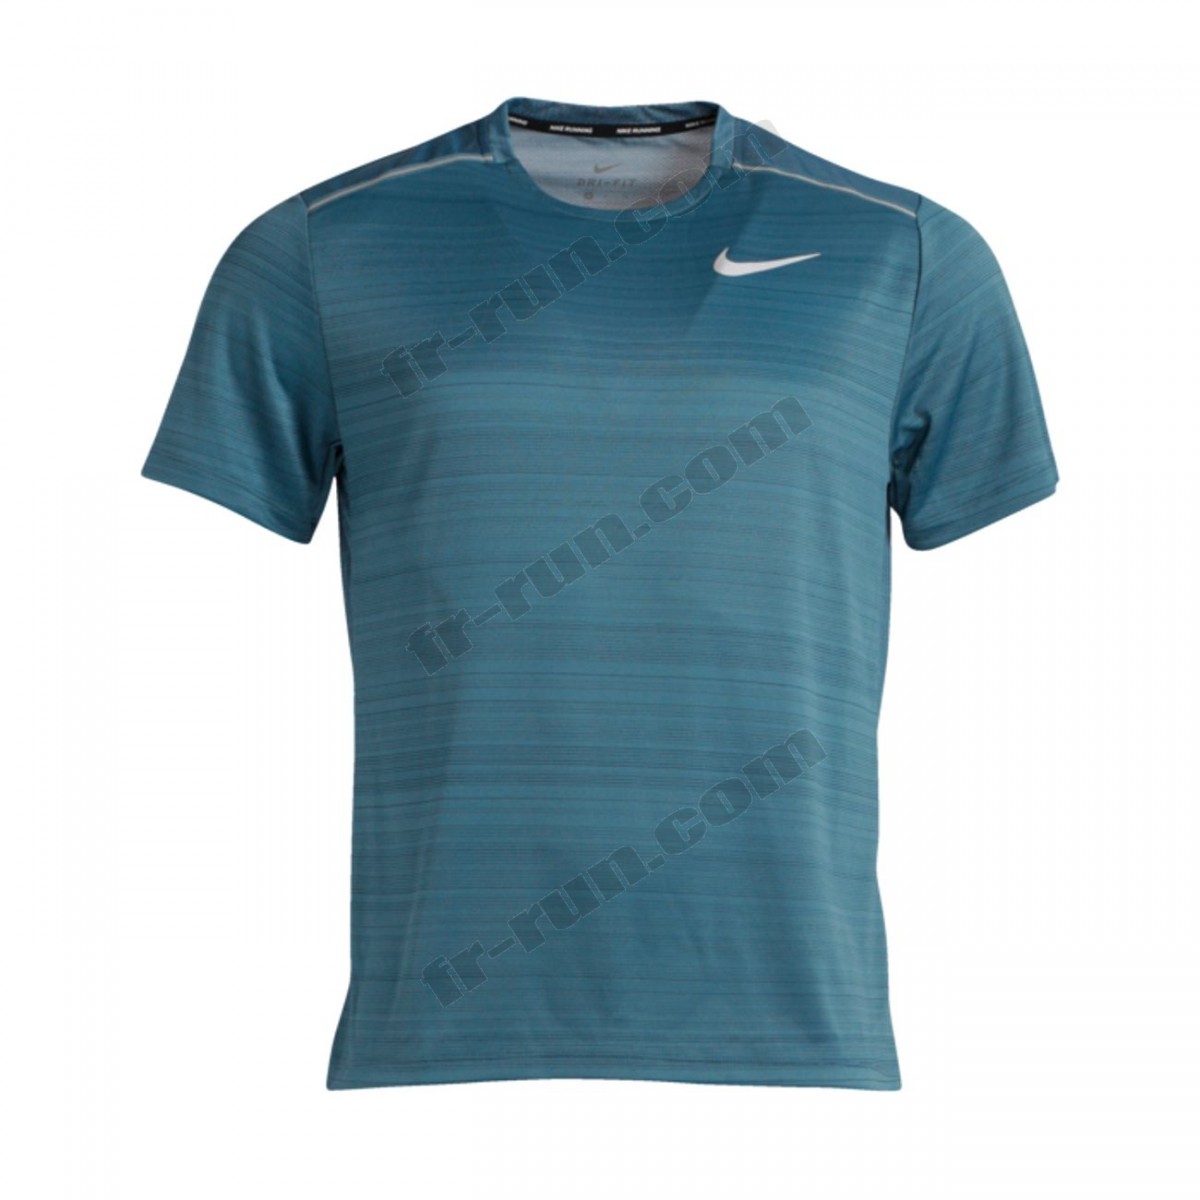 Nike/TEE SHIRT running homme NIKE NK DRY MILER TOP SS, GRIS √ Nouveau style √ Soldes - Nike/TEE SHIRT running homme NIKE NK DRY MILER TOP SS, GRIS √ Nouveau style √ Soldes